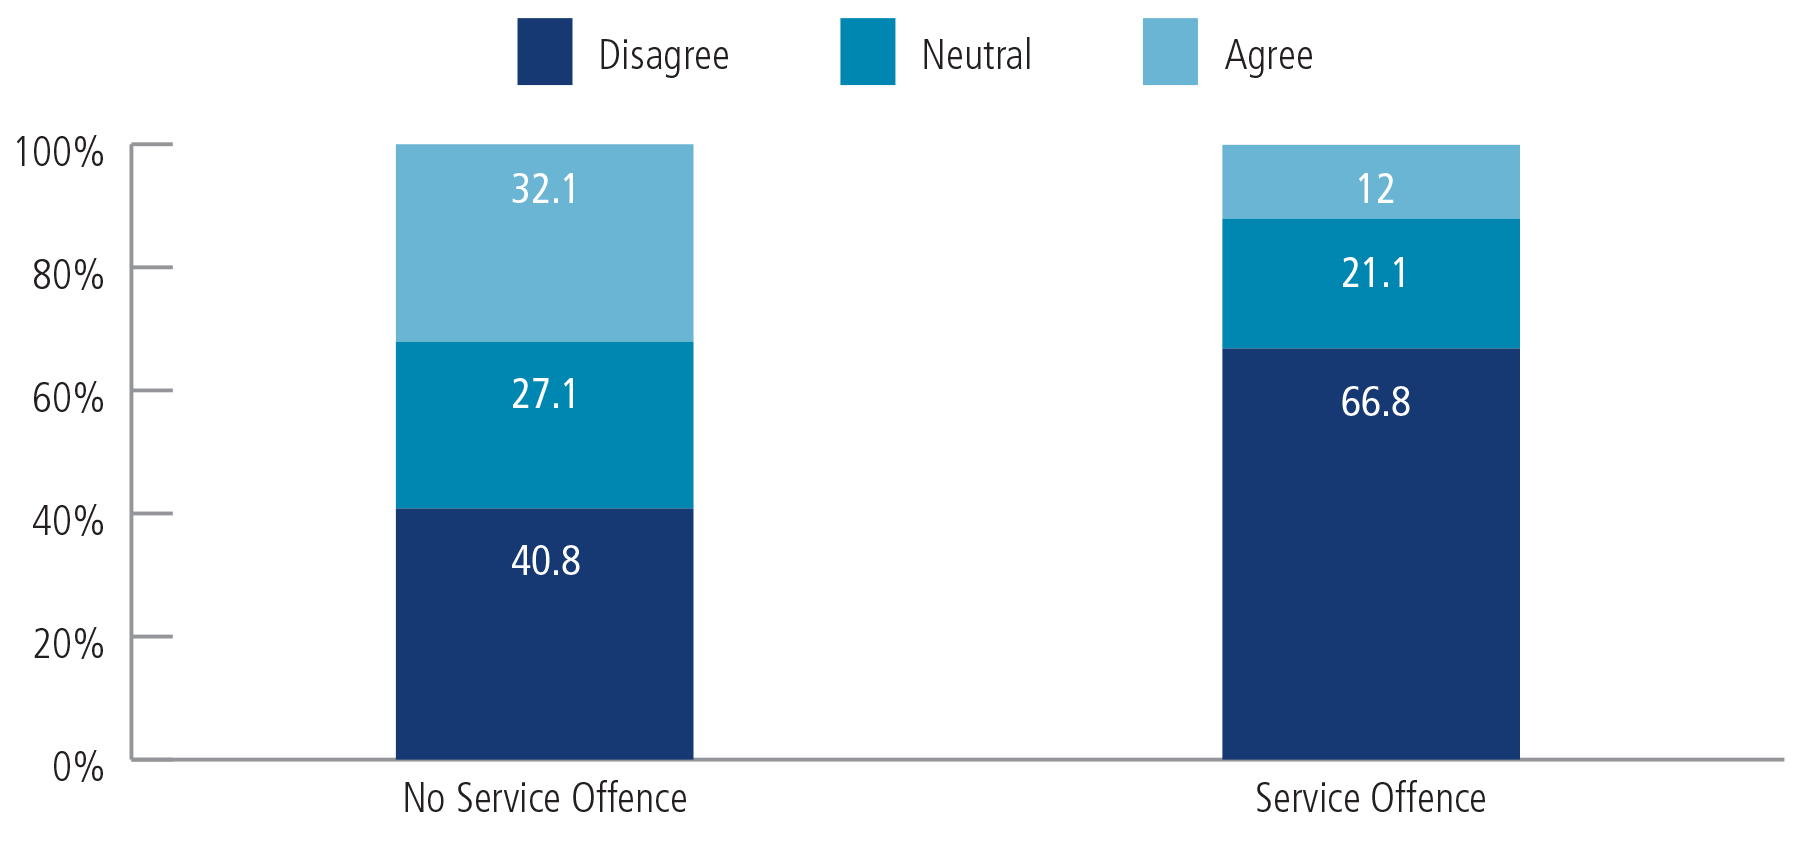 Figure 4: Rates of agreement that the MJS treats victims with dignity and respect.